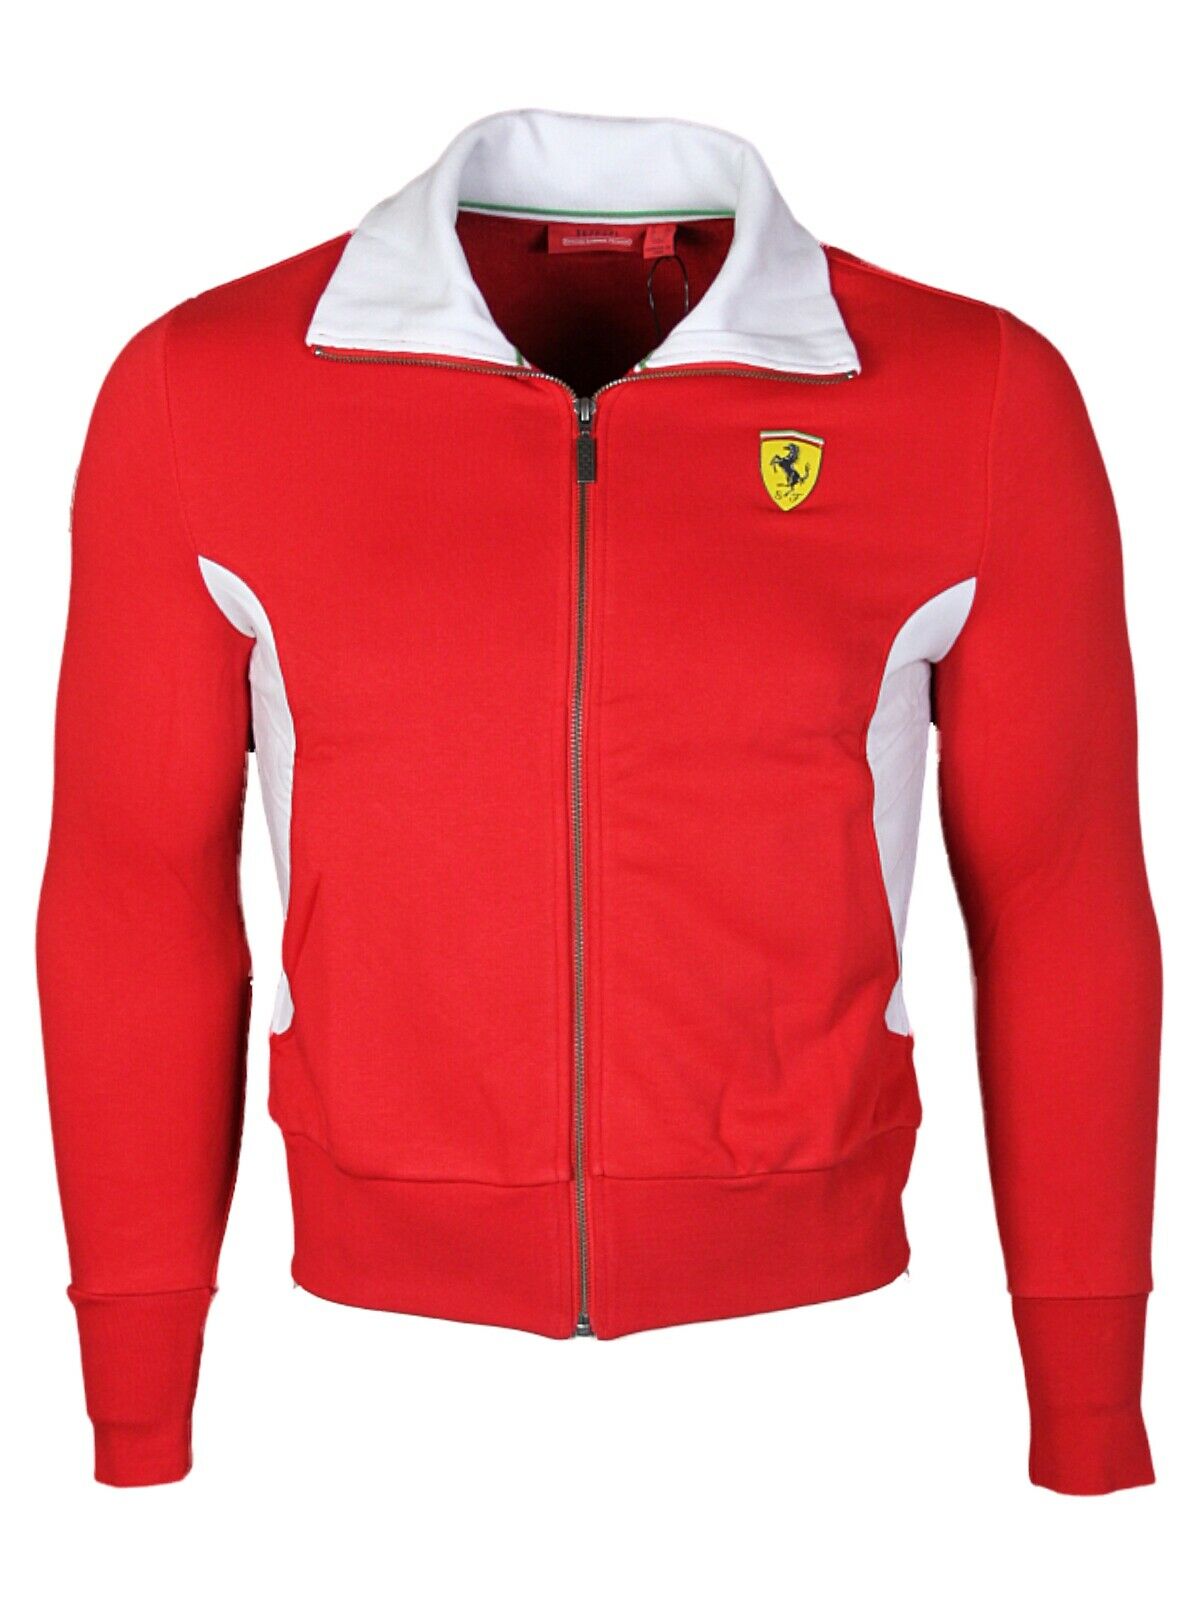 Ferrari Womens Red Jackets Zip Up Fitted Lightweight Casual Ladies ...